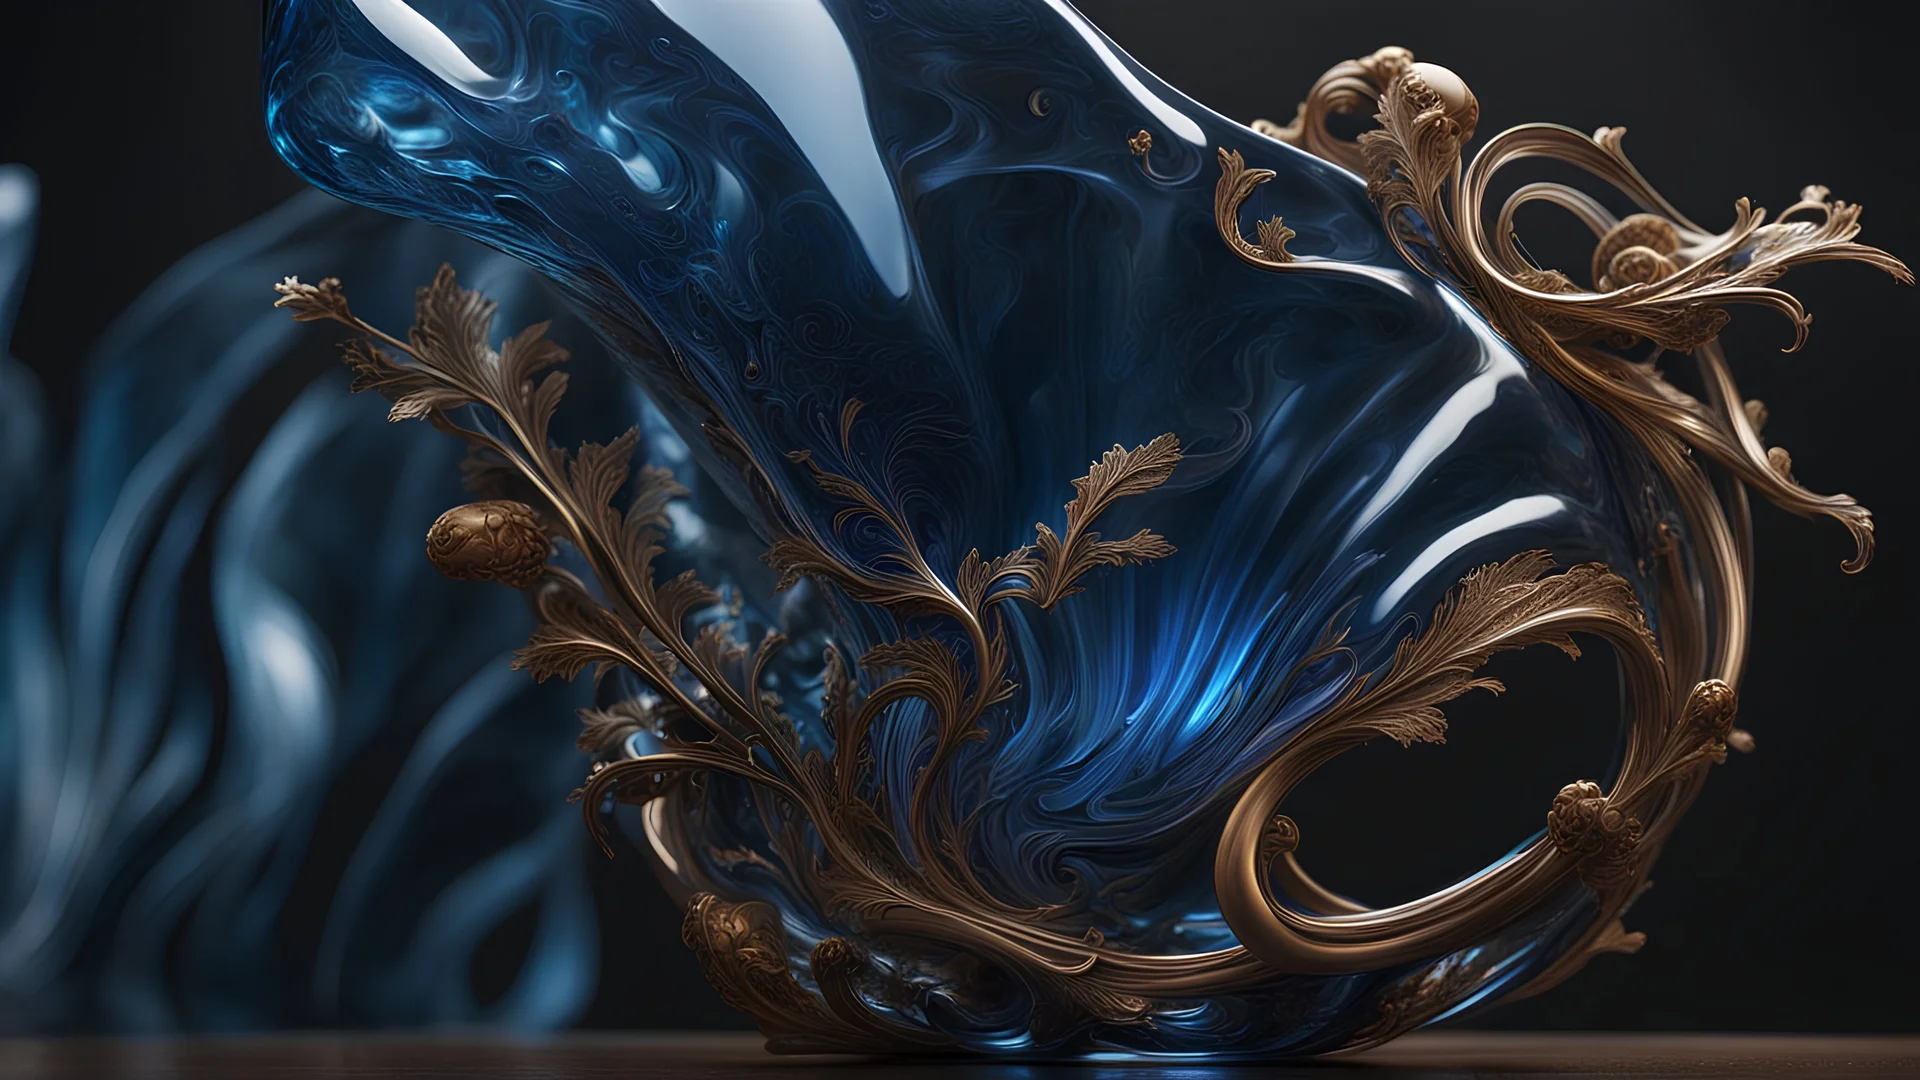 High-end, Die Partei blue glass sculpture, 4th dimensional liquid space, awesome cinematic-quality photography, Art Nouveau-visuals, Vintage style with Octane Render 3D technology, hyperrealism photography, (UHD) with high-quality cinematic character render, Insanely detailed close-ups capturing beautiful complexity, hyperdetailed, intricate, 8k